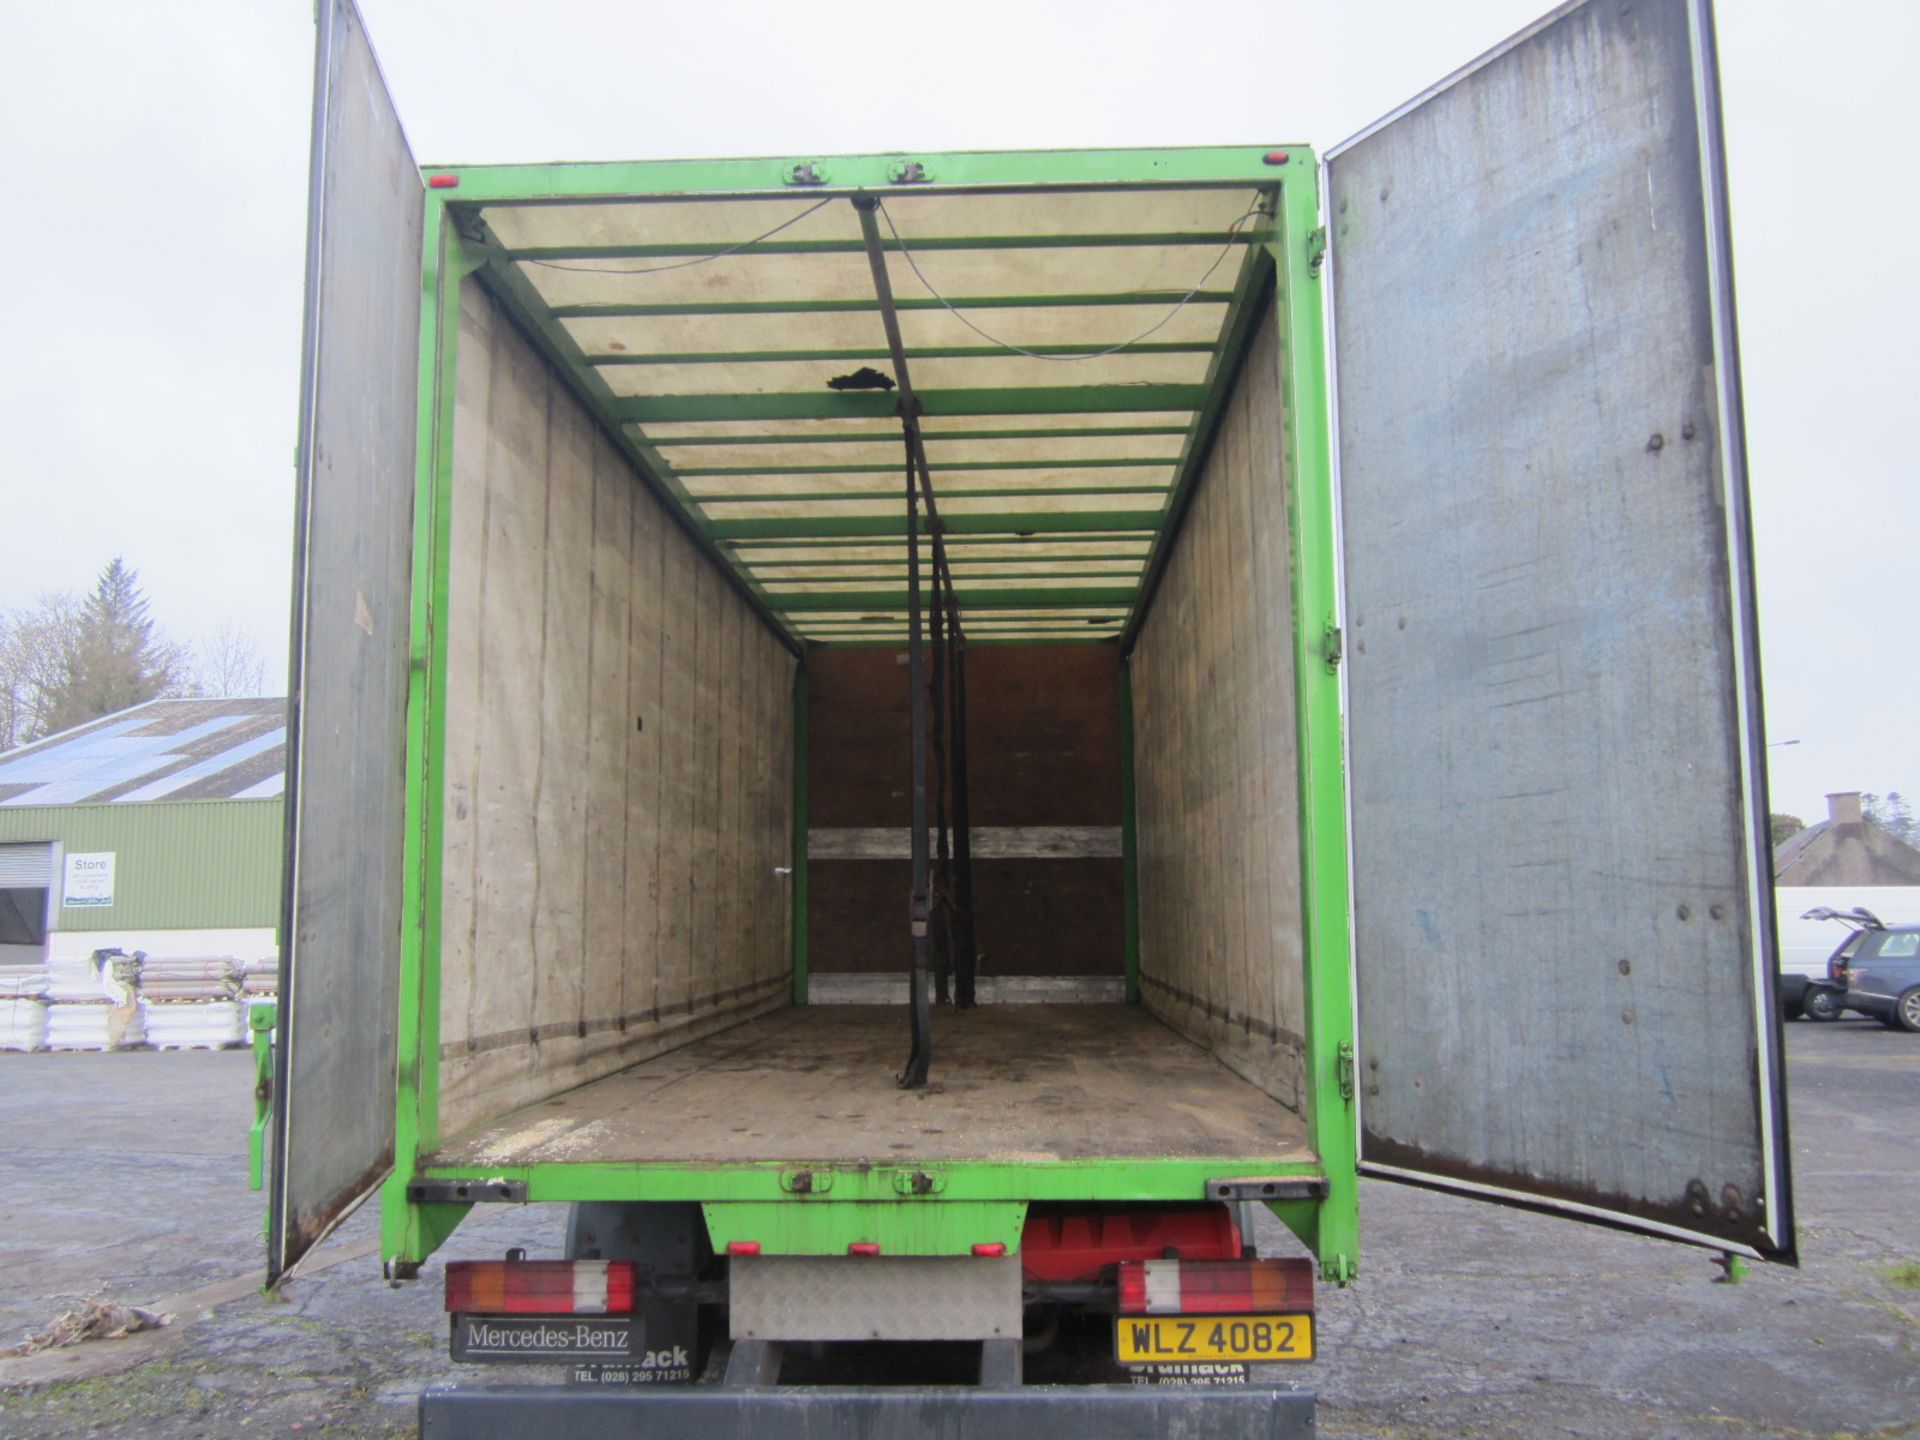 2008 Mercedes Axor 6x2 Curtain Sider, Rear Lift Axle, 26t Gross, 463kms, WLZ 4082 - Image 10 of 10